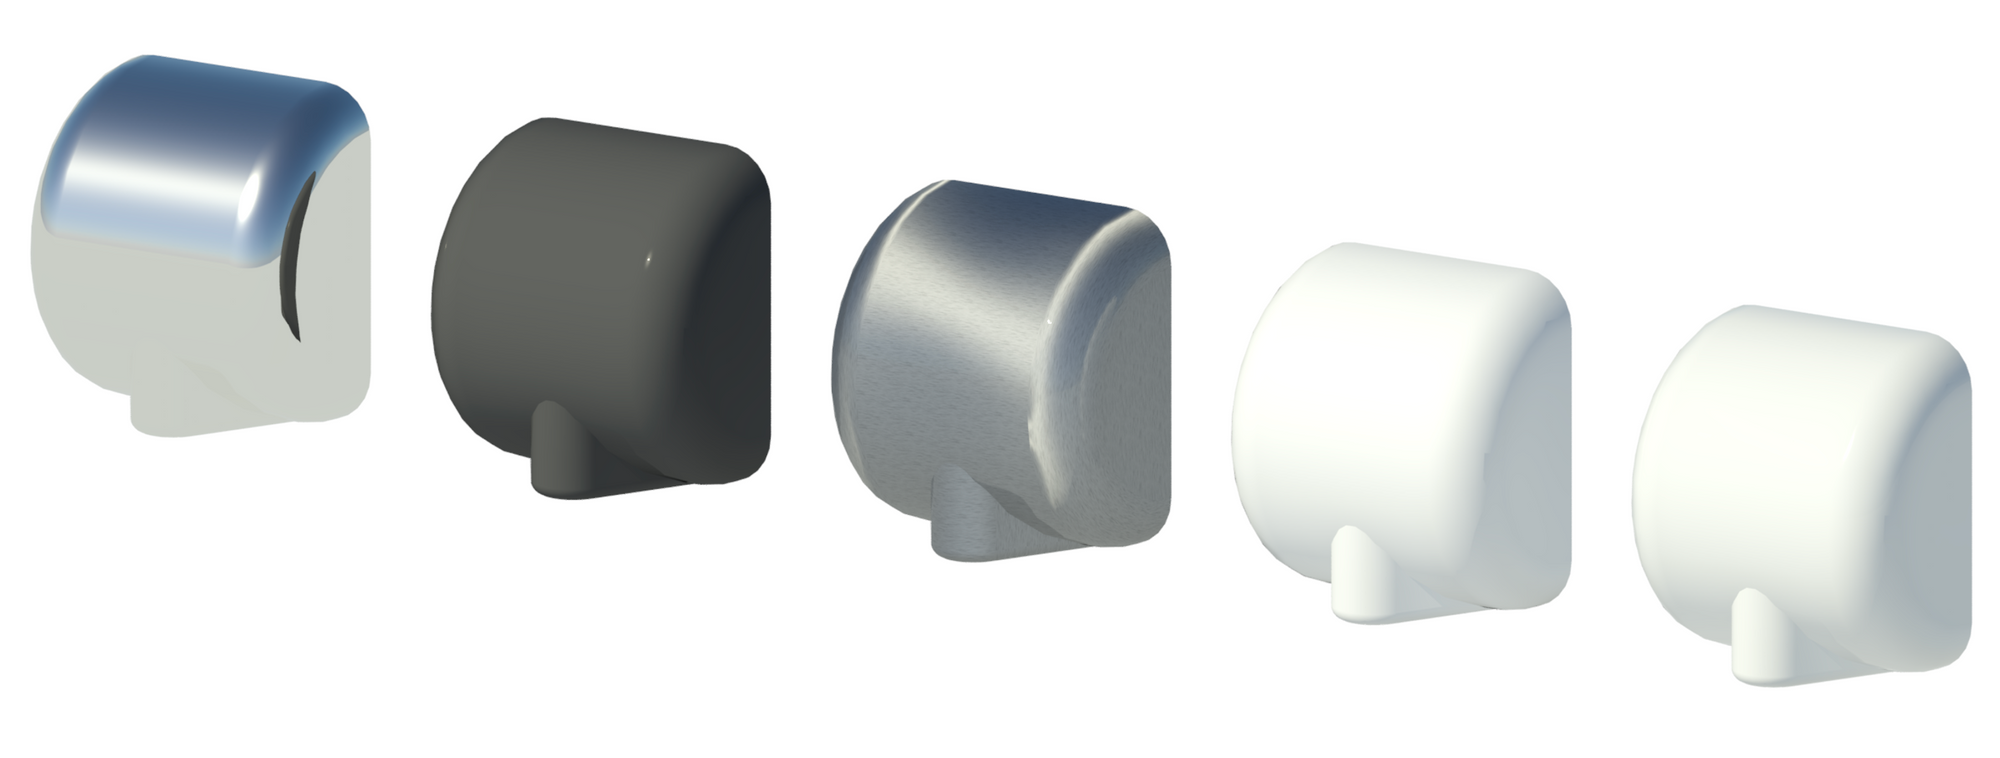 Revit ray trace showing different materials for the Xlerator hand dryer.